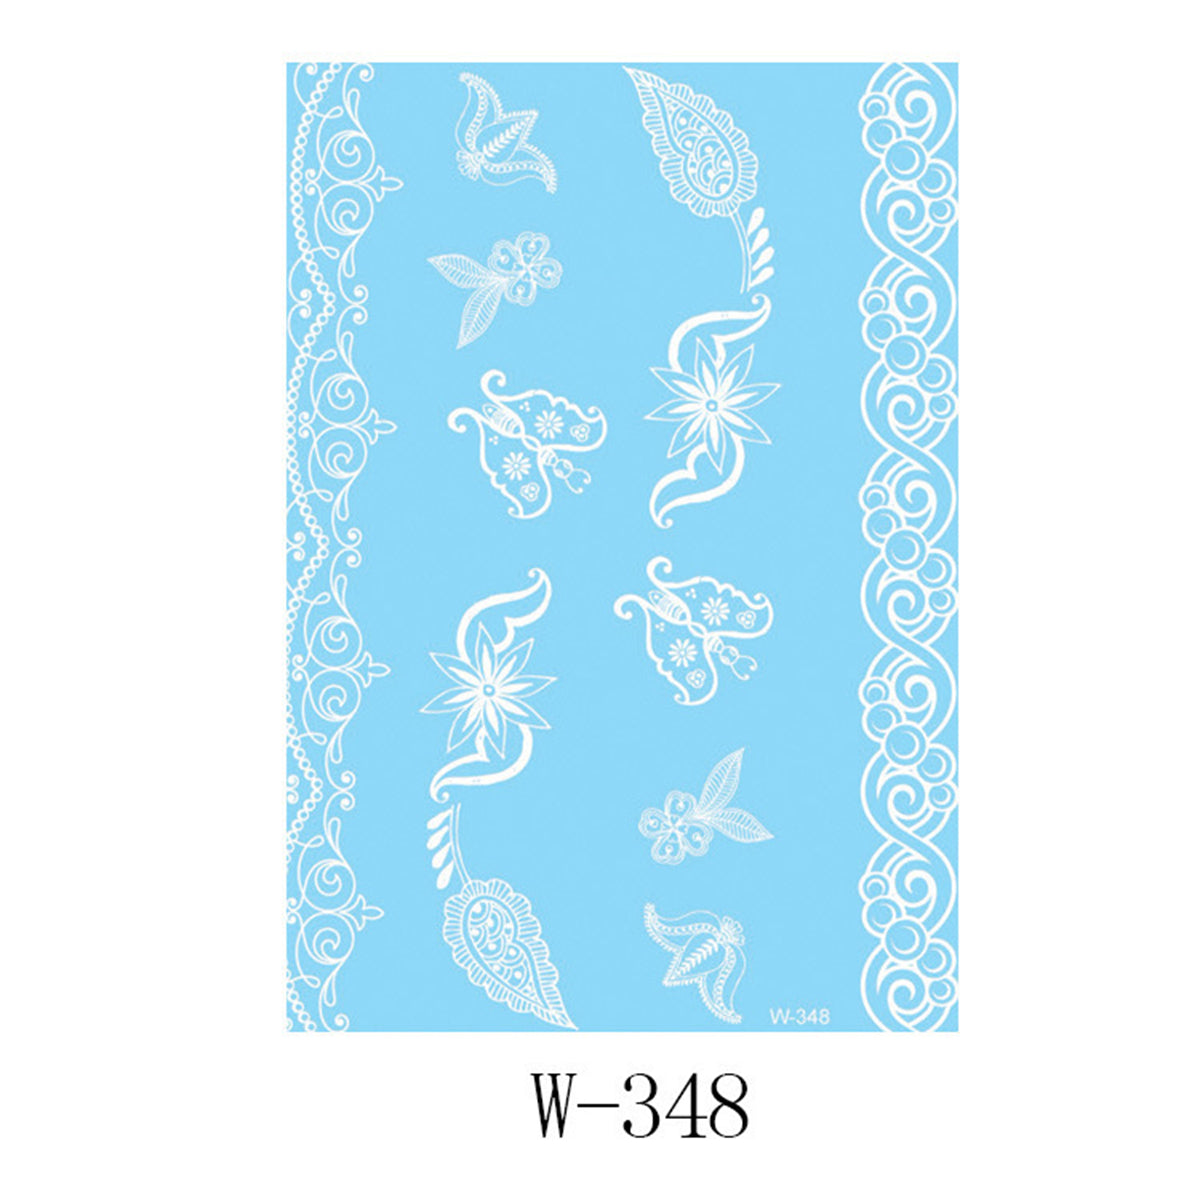 White Feather Butterfly Temporary Tattoo Set - 5 Pcs